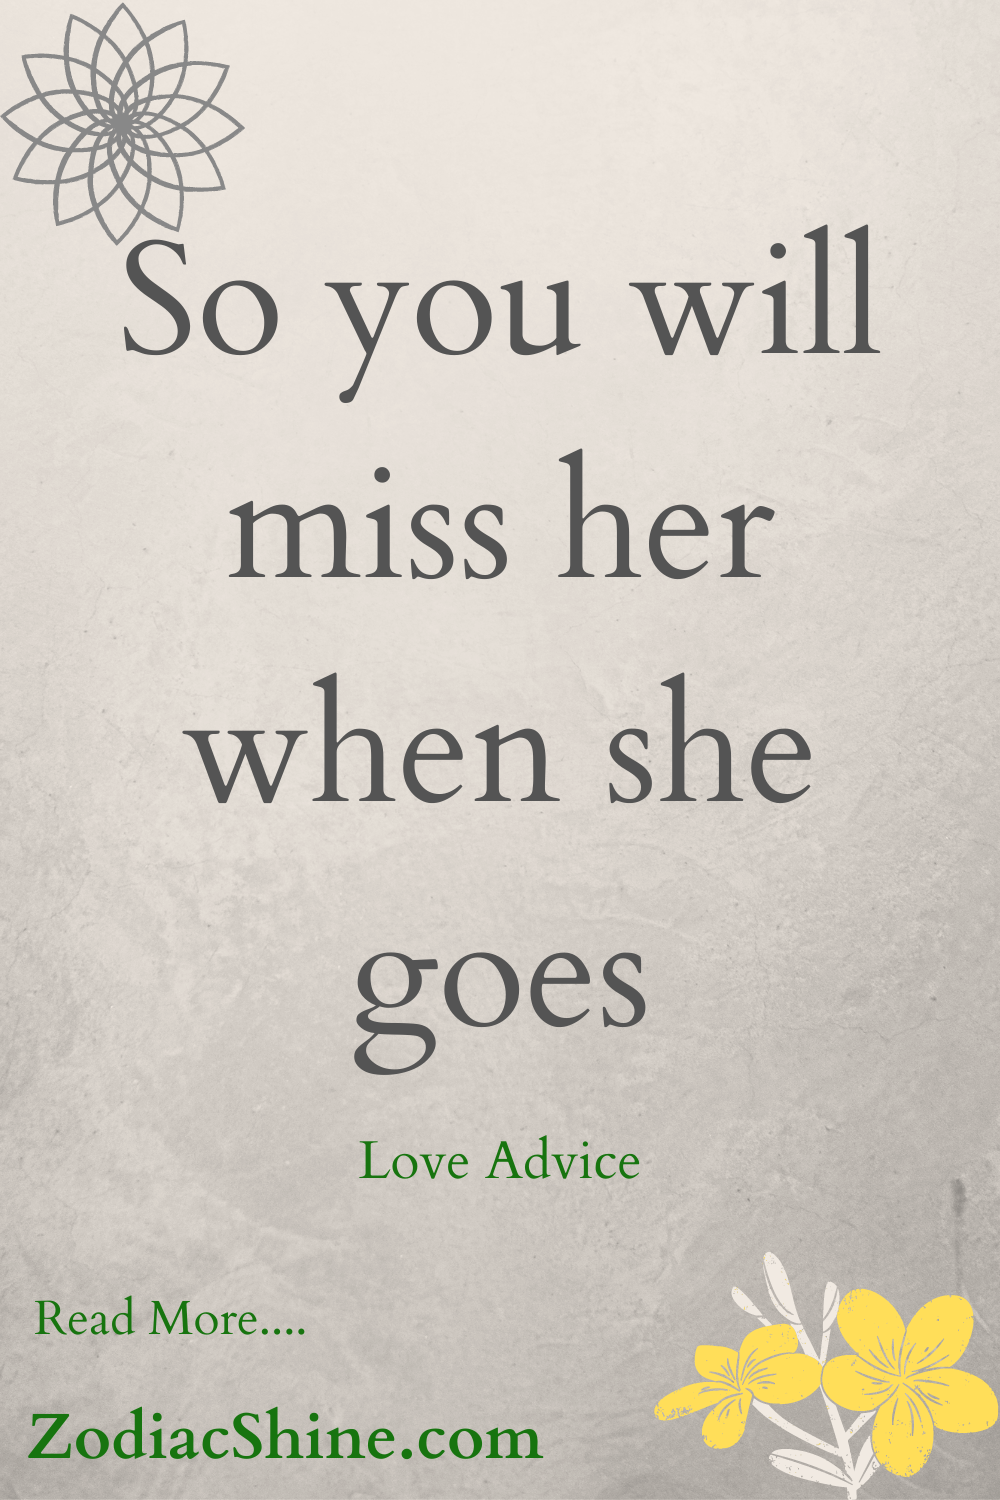 So you will miss her when she goes